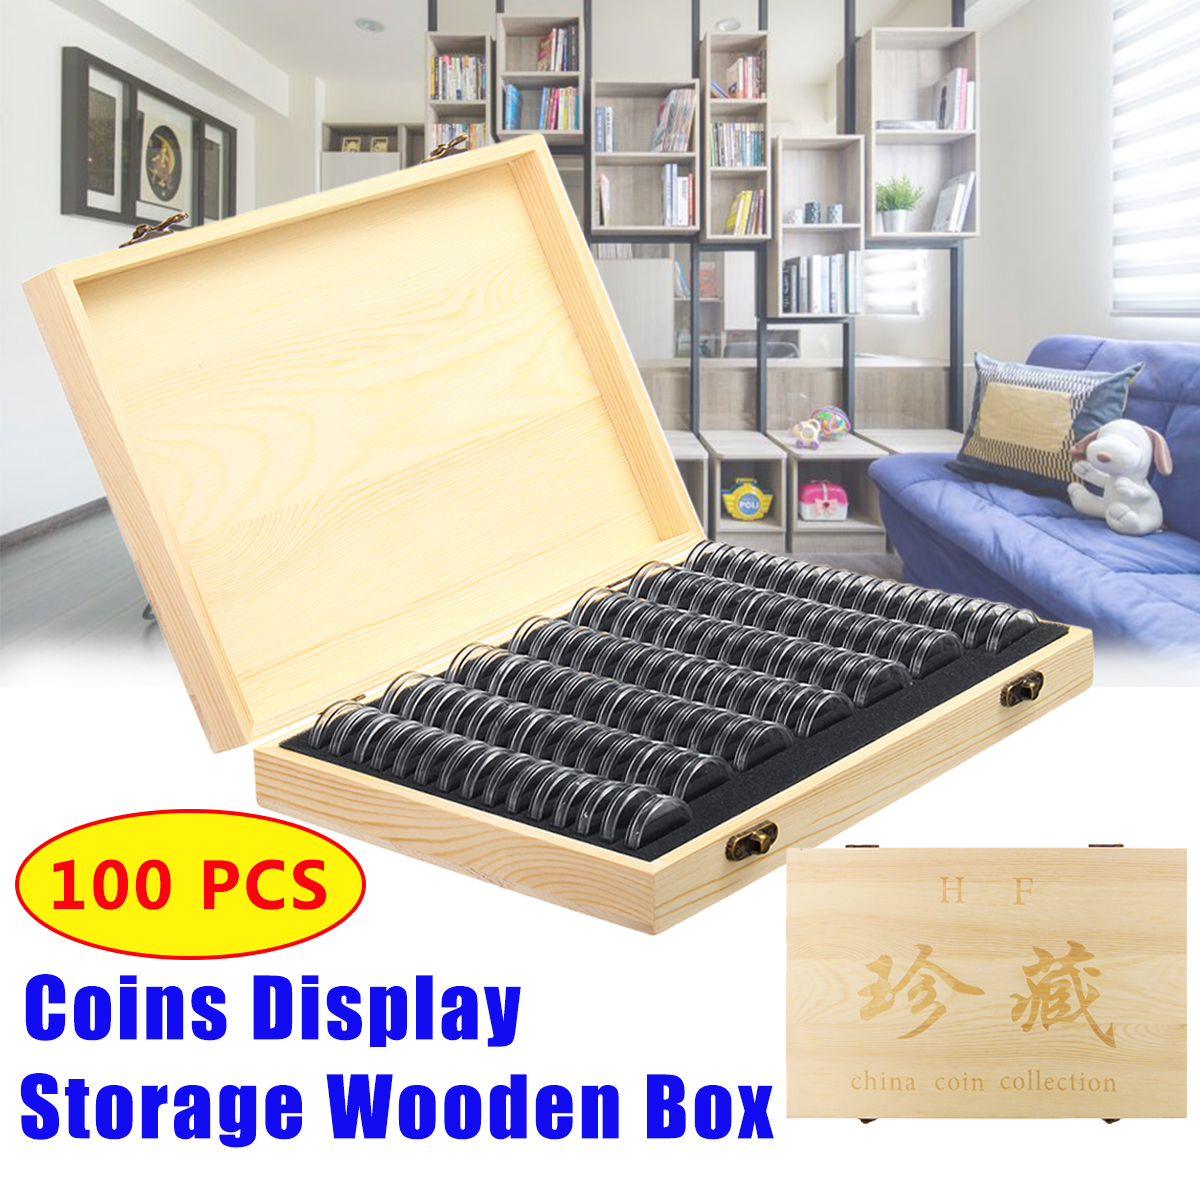 100PCS-Rugged-Wooden-Commemorative-Coin-Display-Case-Capsule-Holder-Storage-Collection-Box-1646129-2